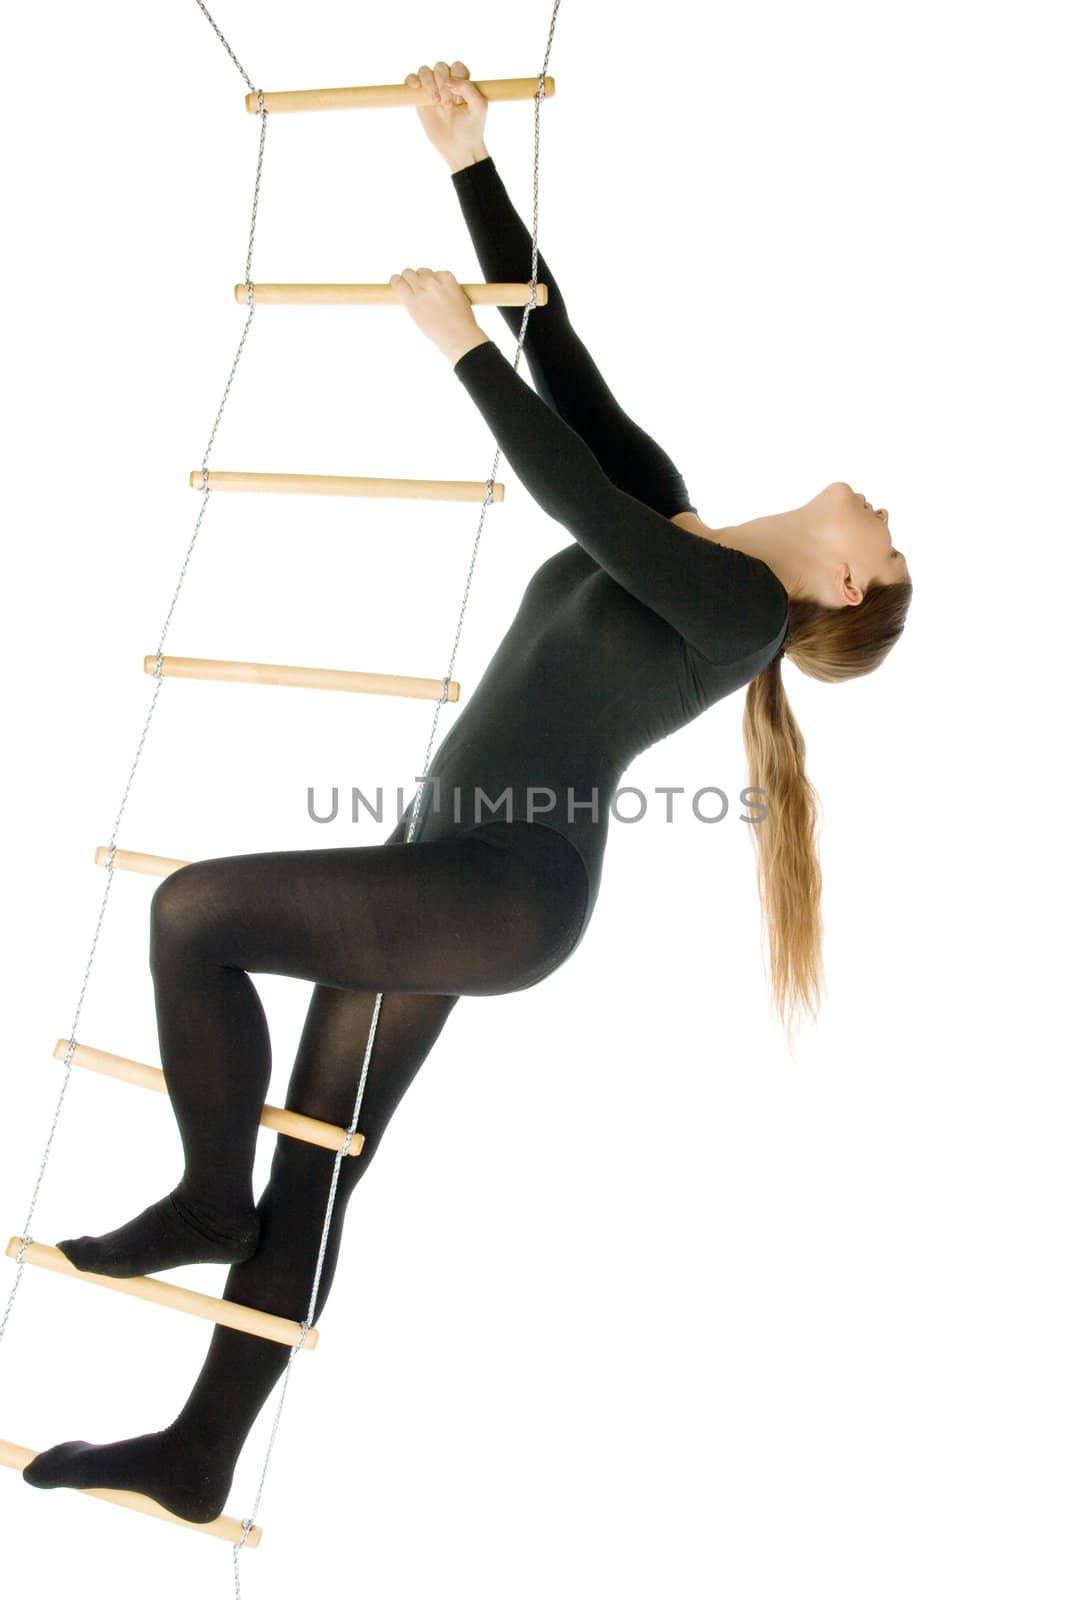 Isolated photo of a woman on a rope ladder